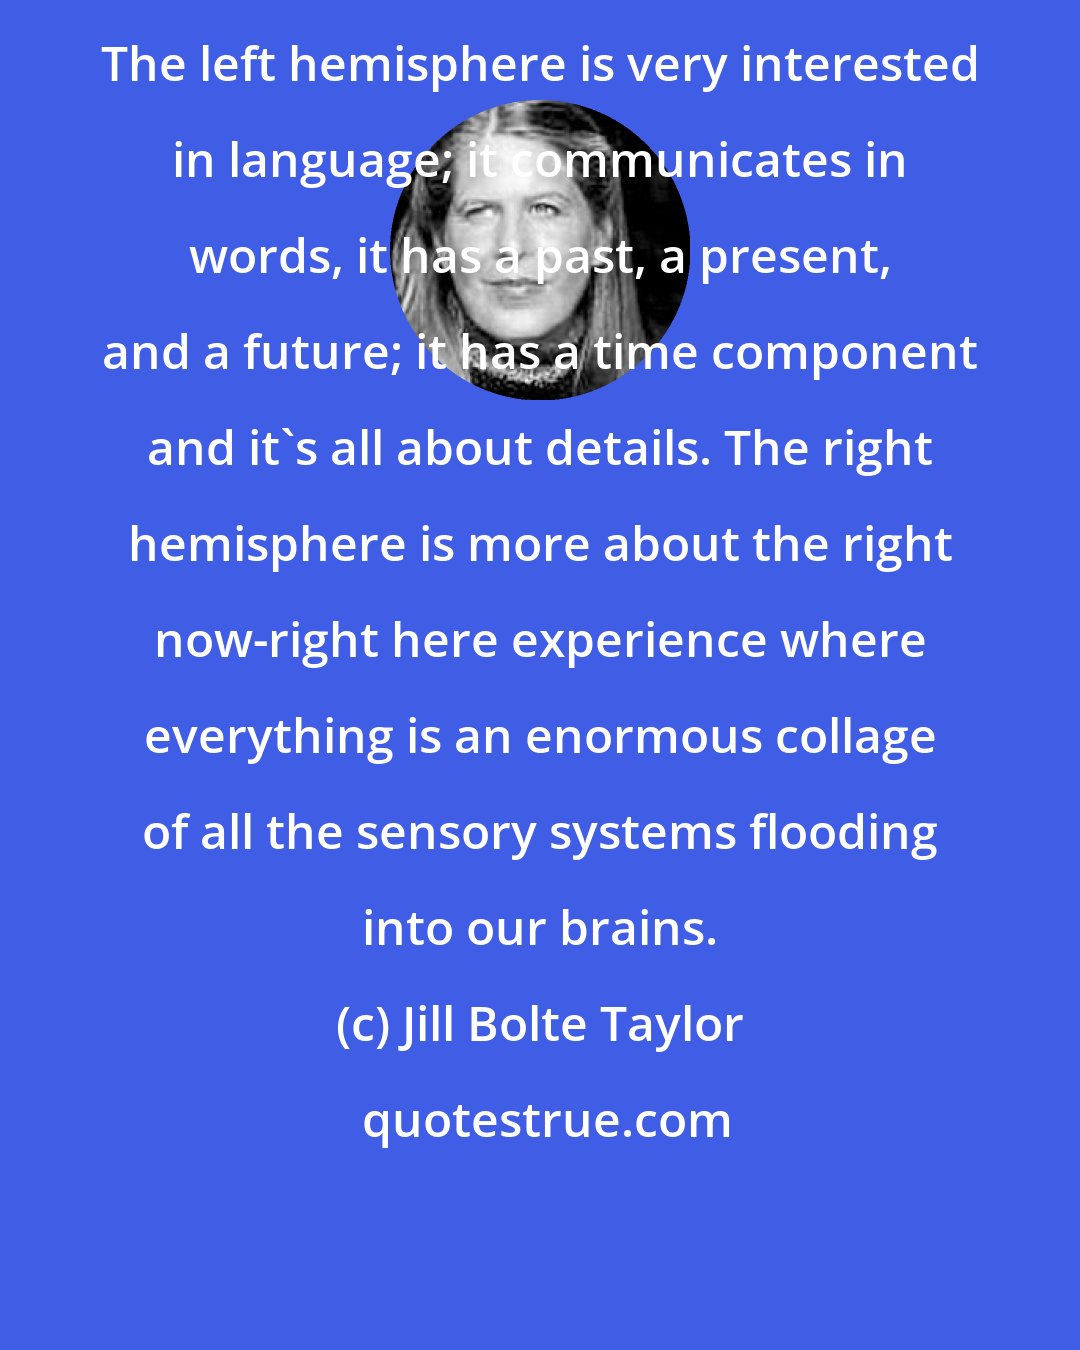 Jill Bolte Taylor: The left hemisphere is very interested in language; it communicates in words, it has a past, a present, and a future; it has a time component and it's all about details. The right hemisphere is more about the right now-right here experience where everything is an enormous collage of all the sensory systems flooding into our brains.